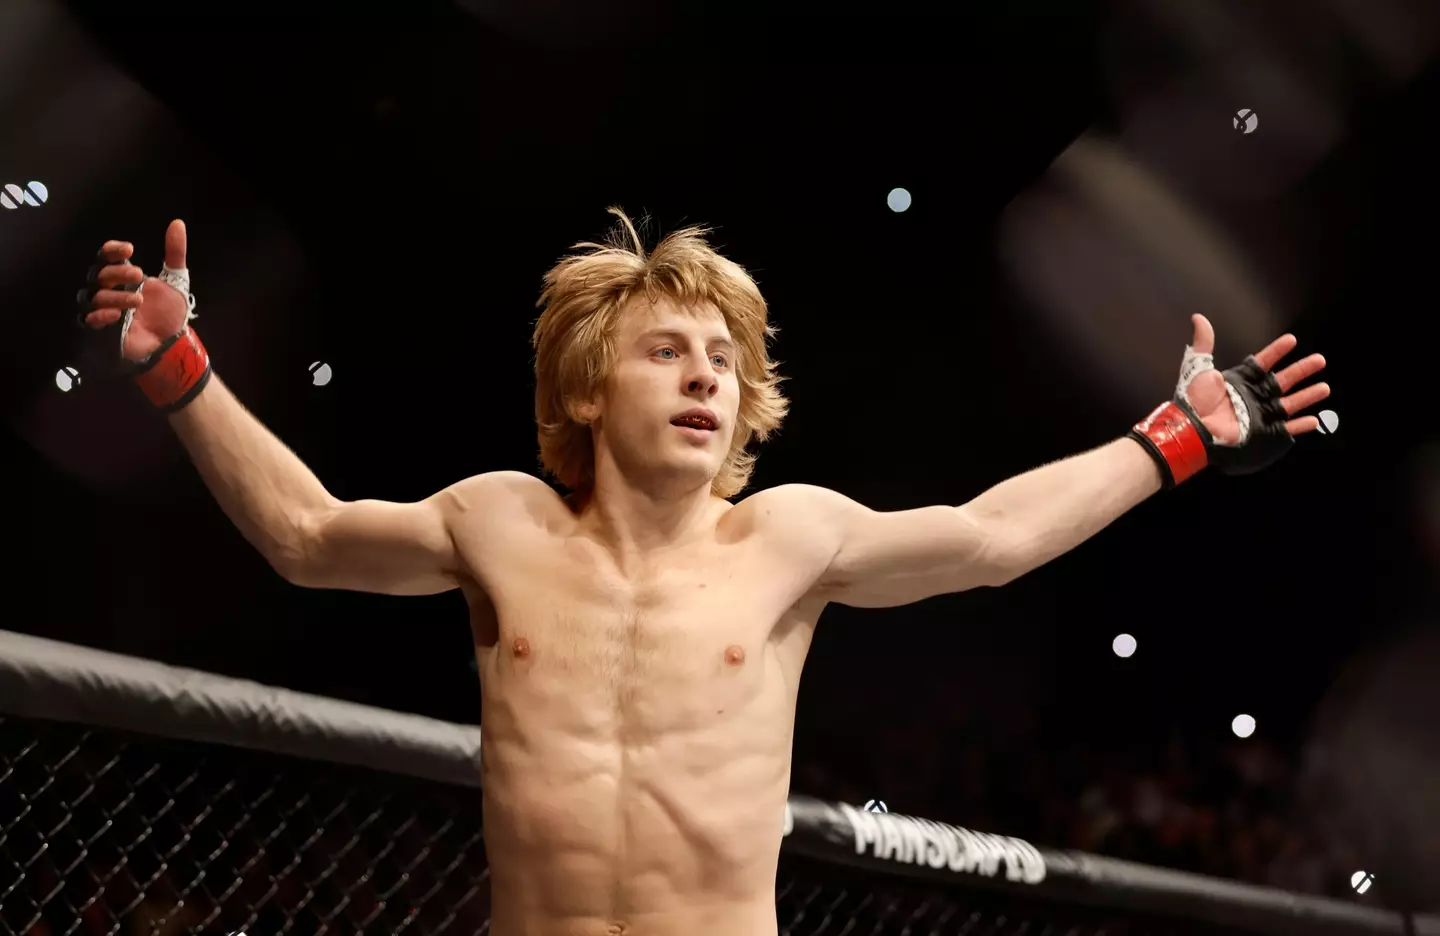 Last month, Pimblett opened up about his post-win meal after tapping out Vargas during UFC London.